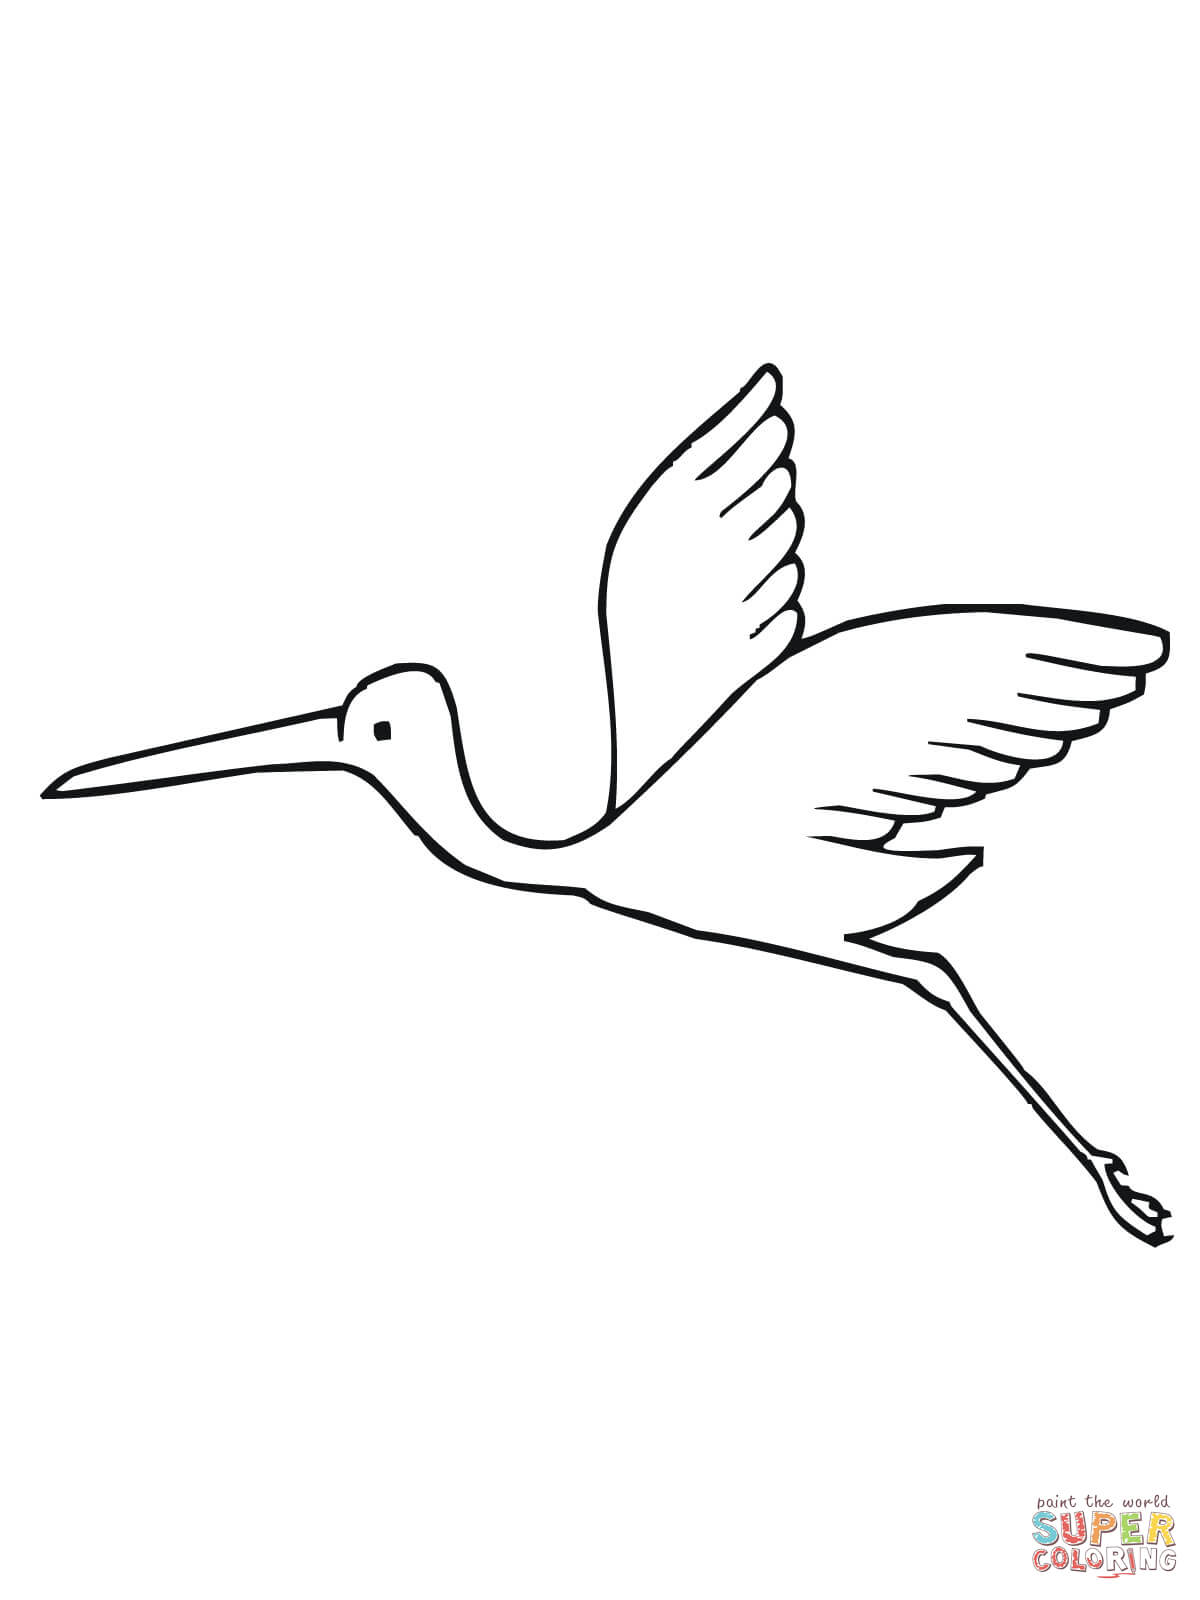 Flying Stork coloring page | Free Printable Coloring Pages